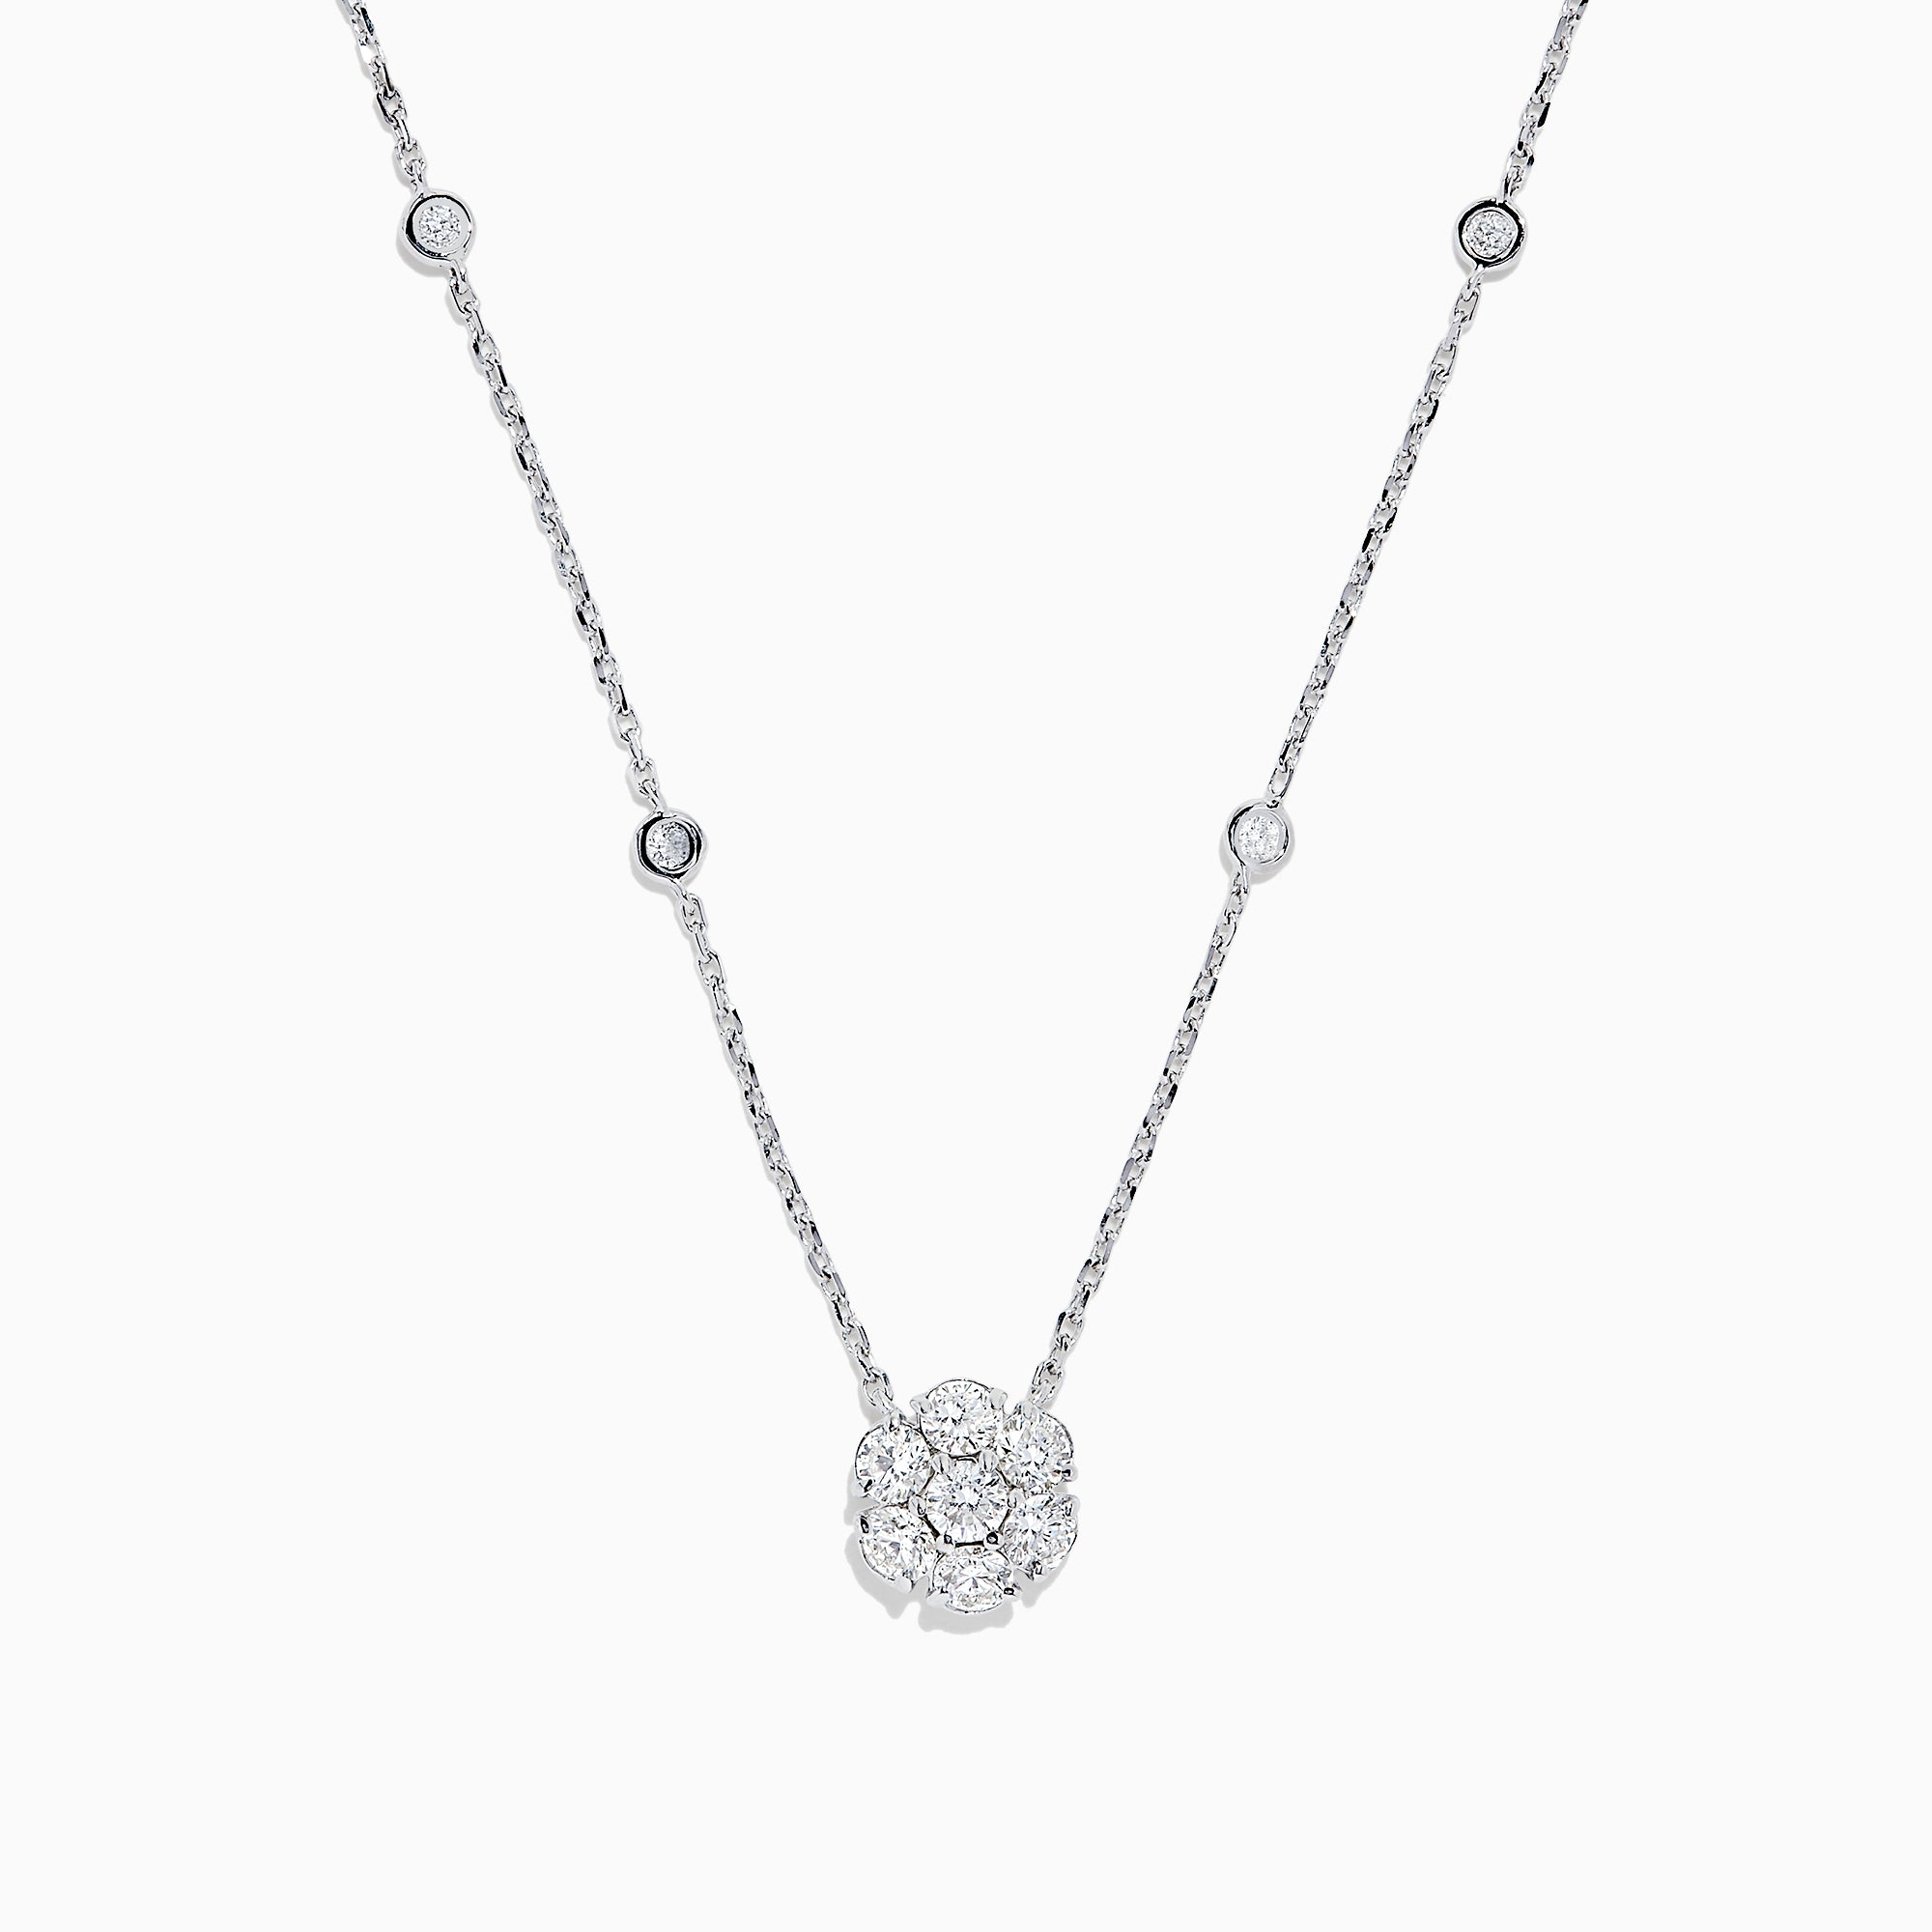 14K White Gold 18" Diamond Station and Flower Cluster Necklace, 1.51 TCW